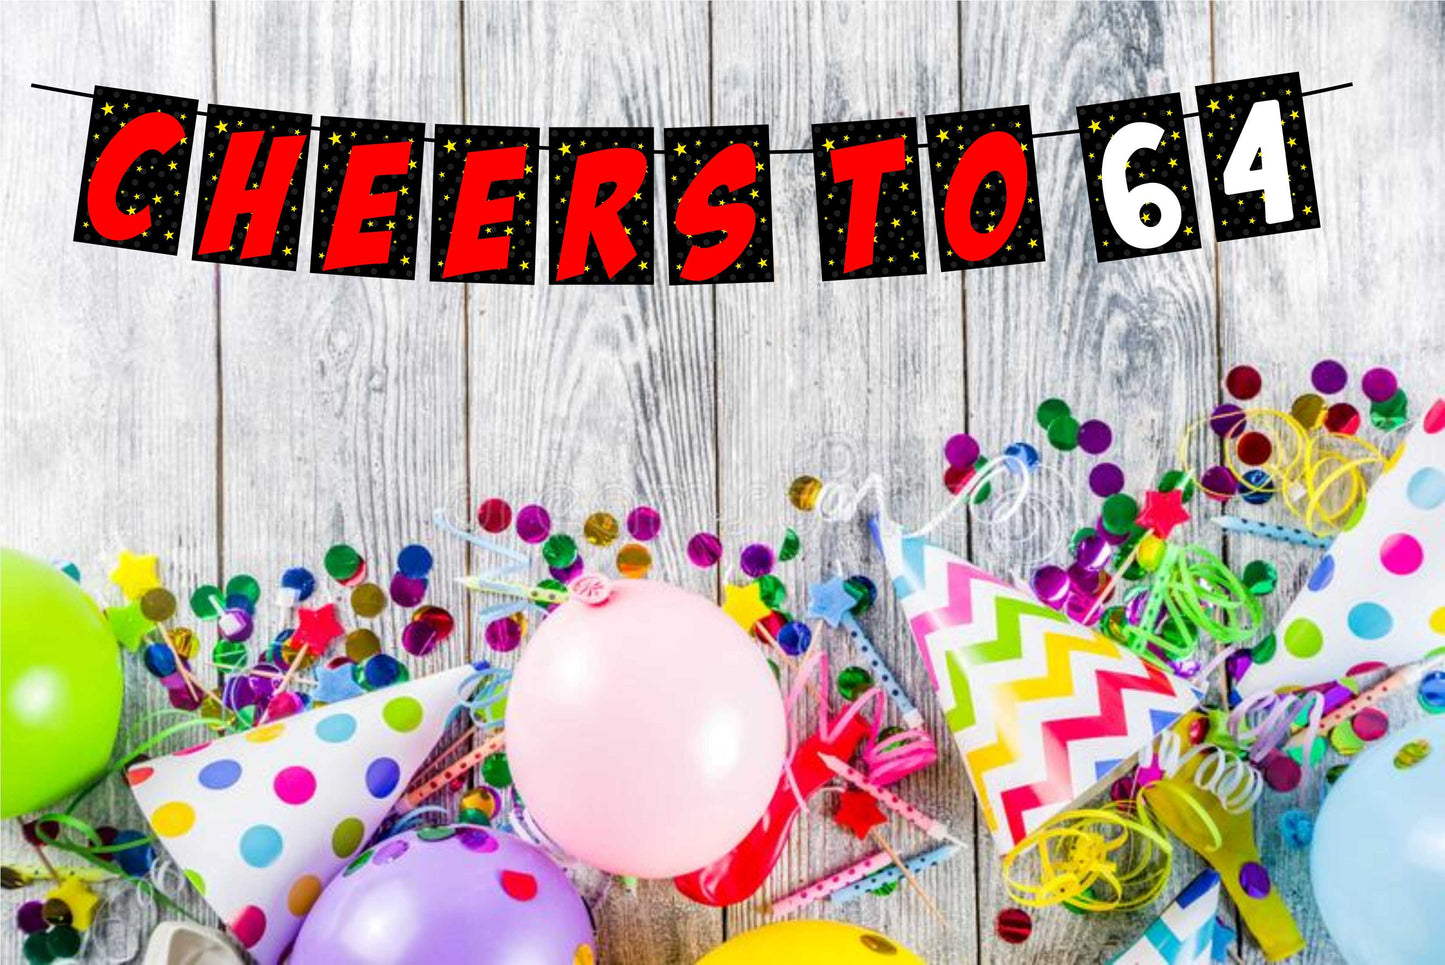 Cheers to 64 Birthday Banner for Photo Shoot Backdrop and Theme Party